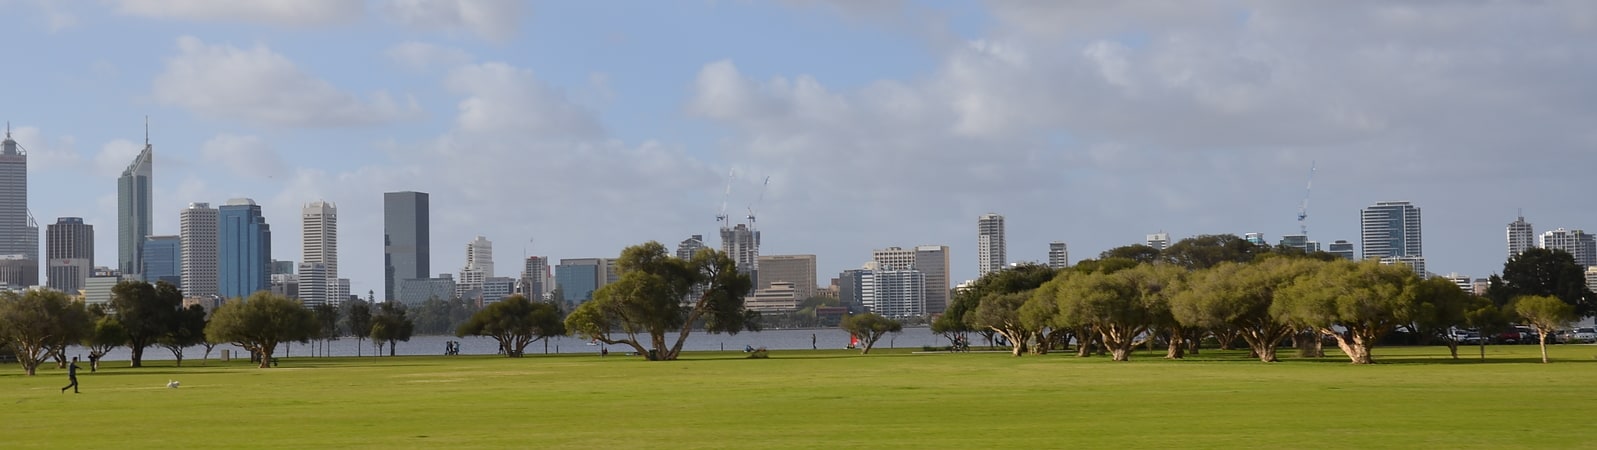 Park in the City of South Perth, Australia